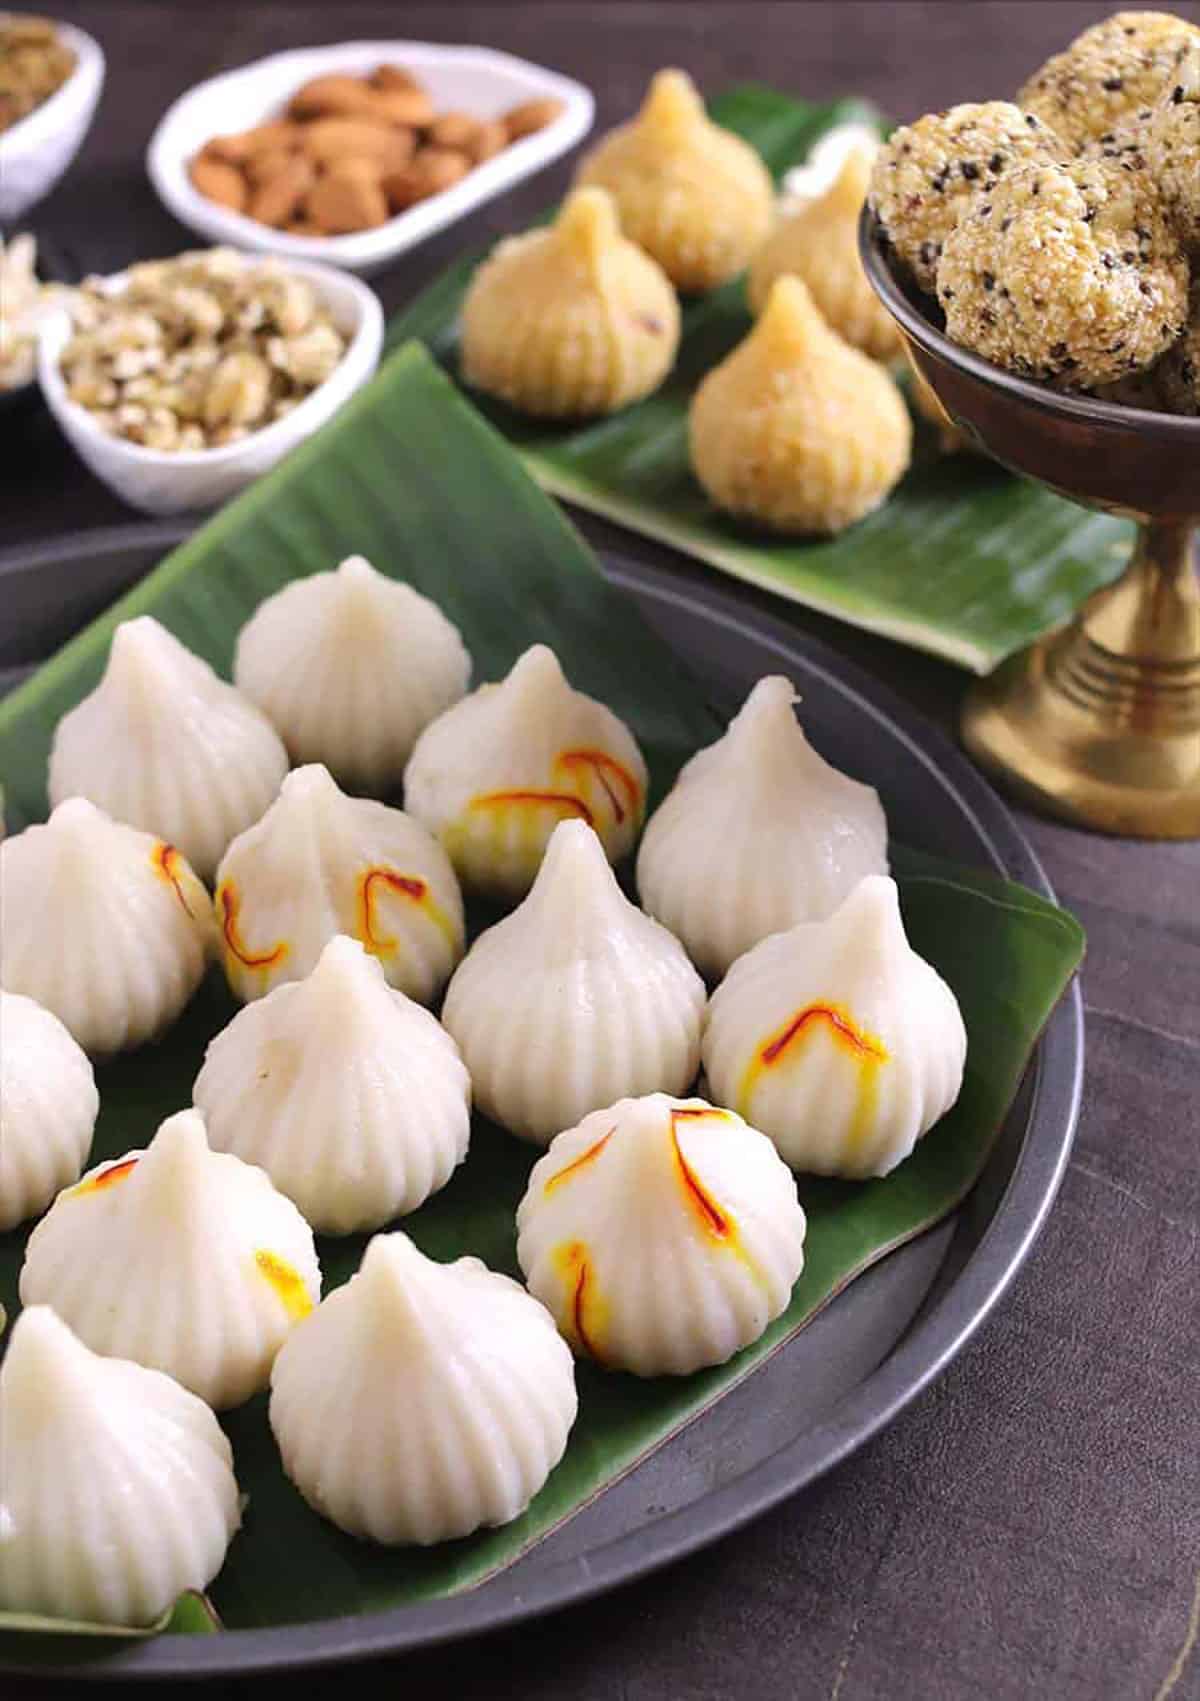 Ukadiche modak served along with laddus and other special prasad items prepared for Vinayaka Chaturthi.